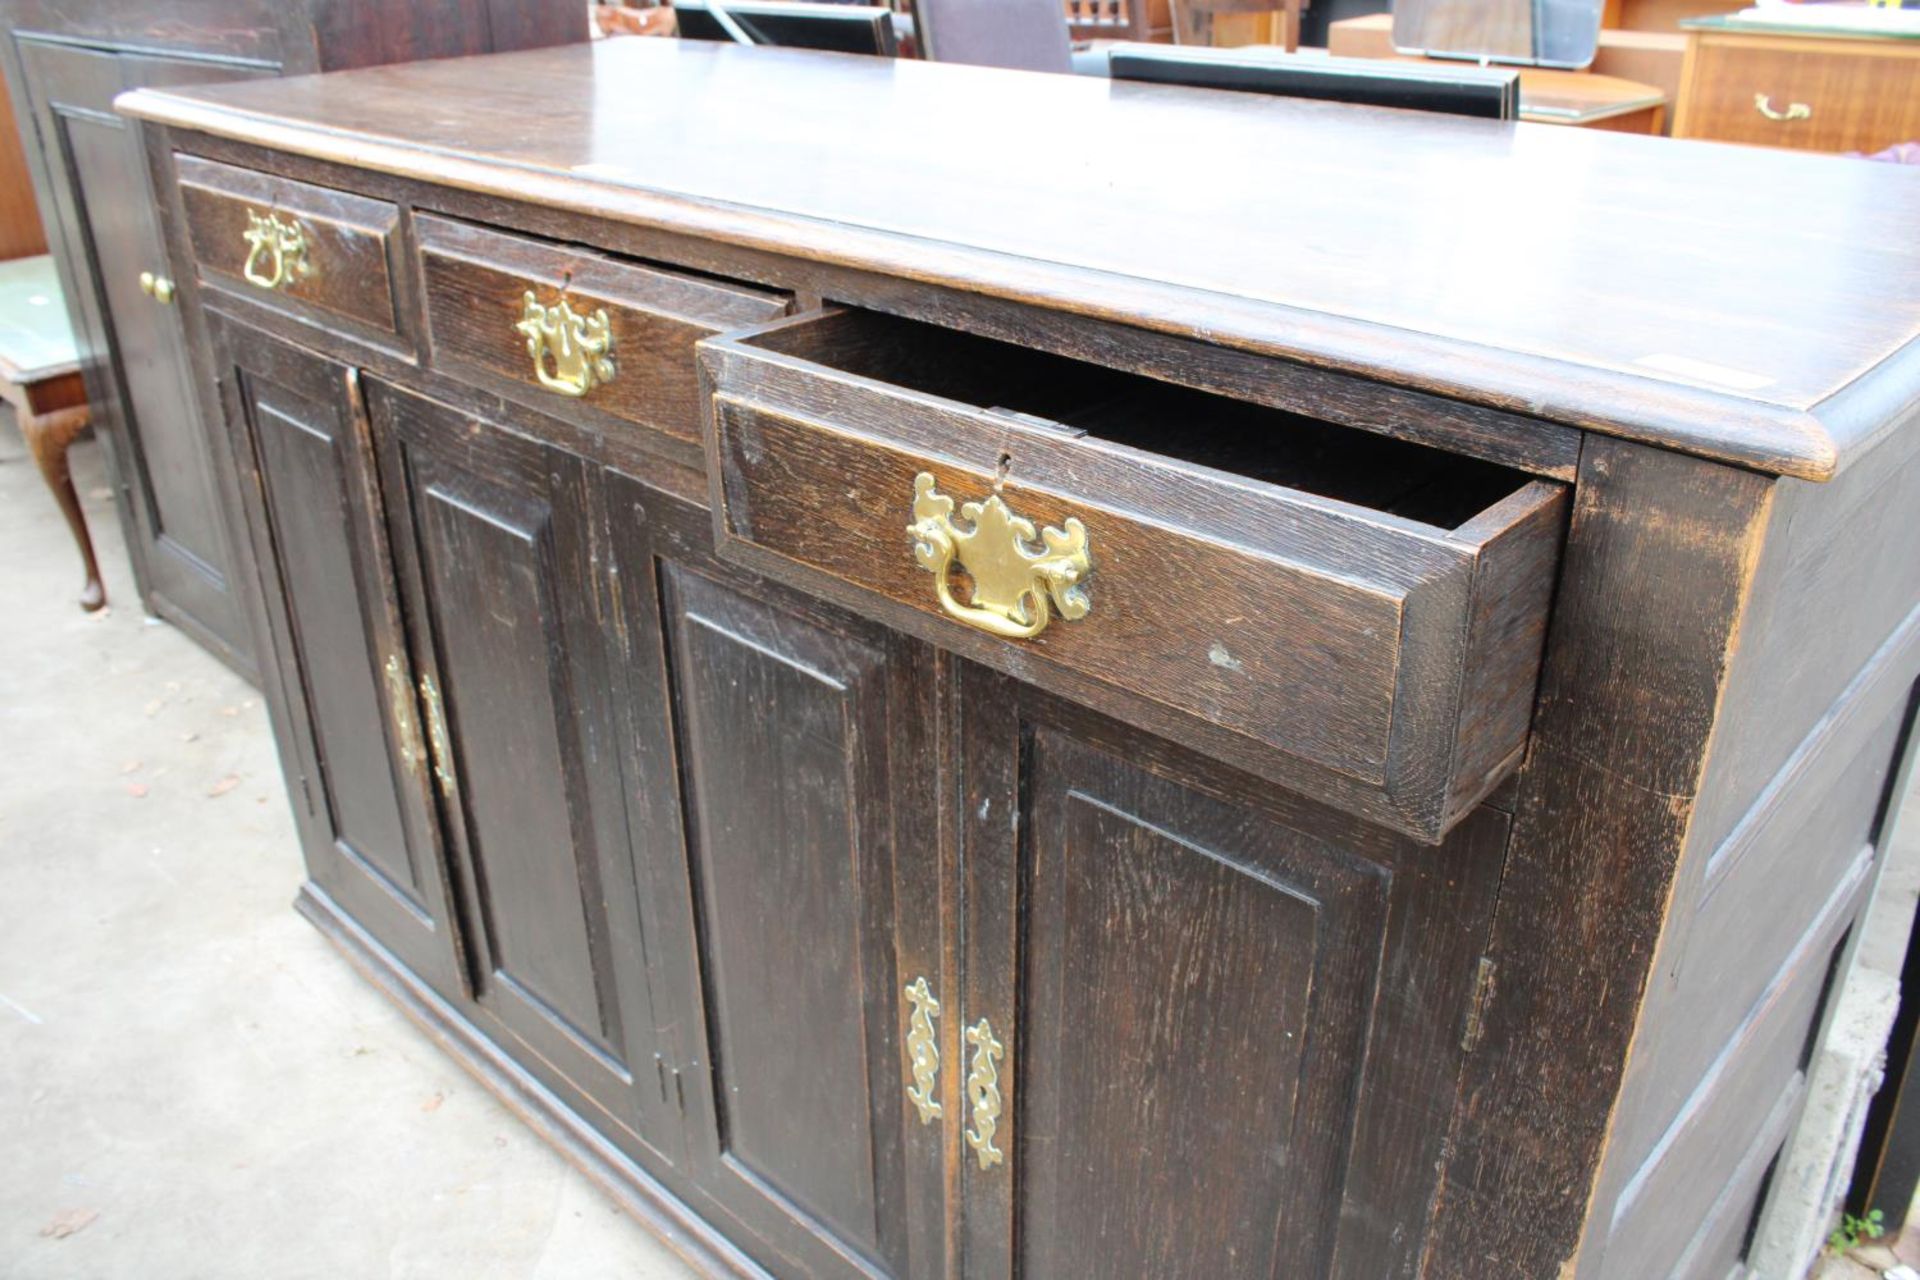 AN OAK GEORGE III STYLE DRESSER WITH FOUR CUPBOARDS AND THREE DRAWERS AND BRASS HANDLES, 60" WIDE - Image 3 of 4